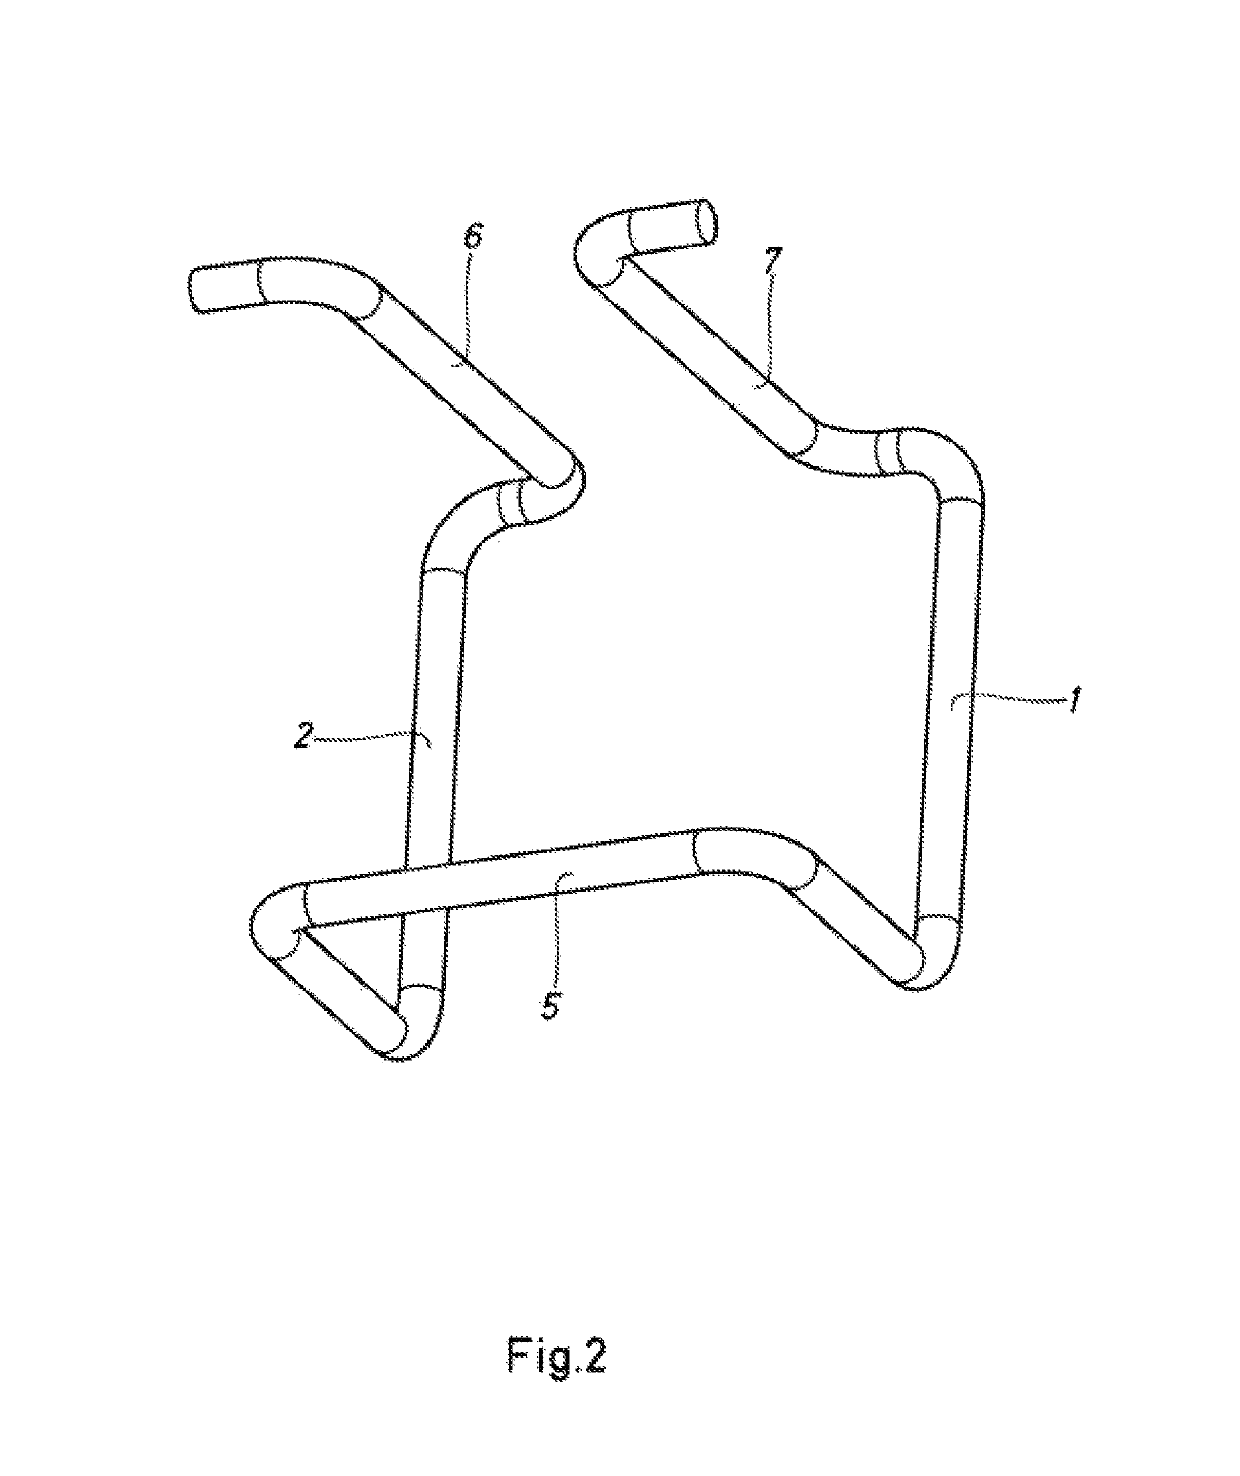 Device for dismountably connecting two intersecting formwork beams